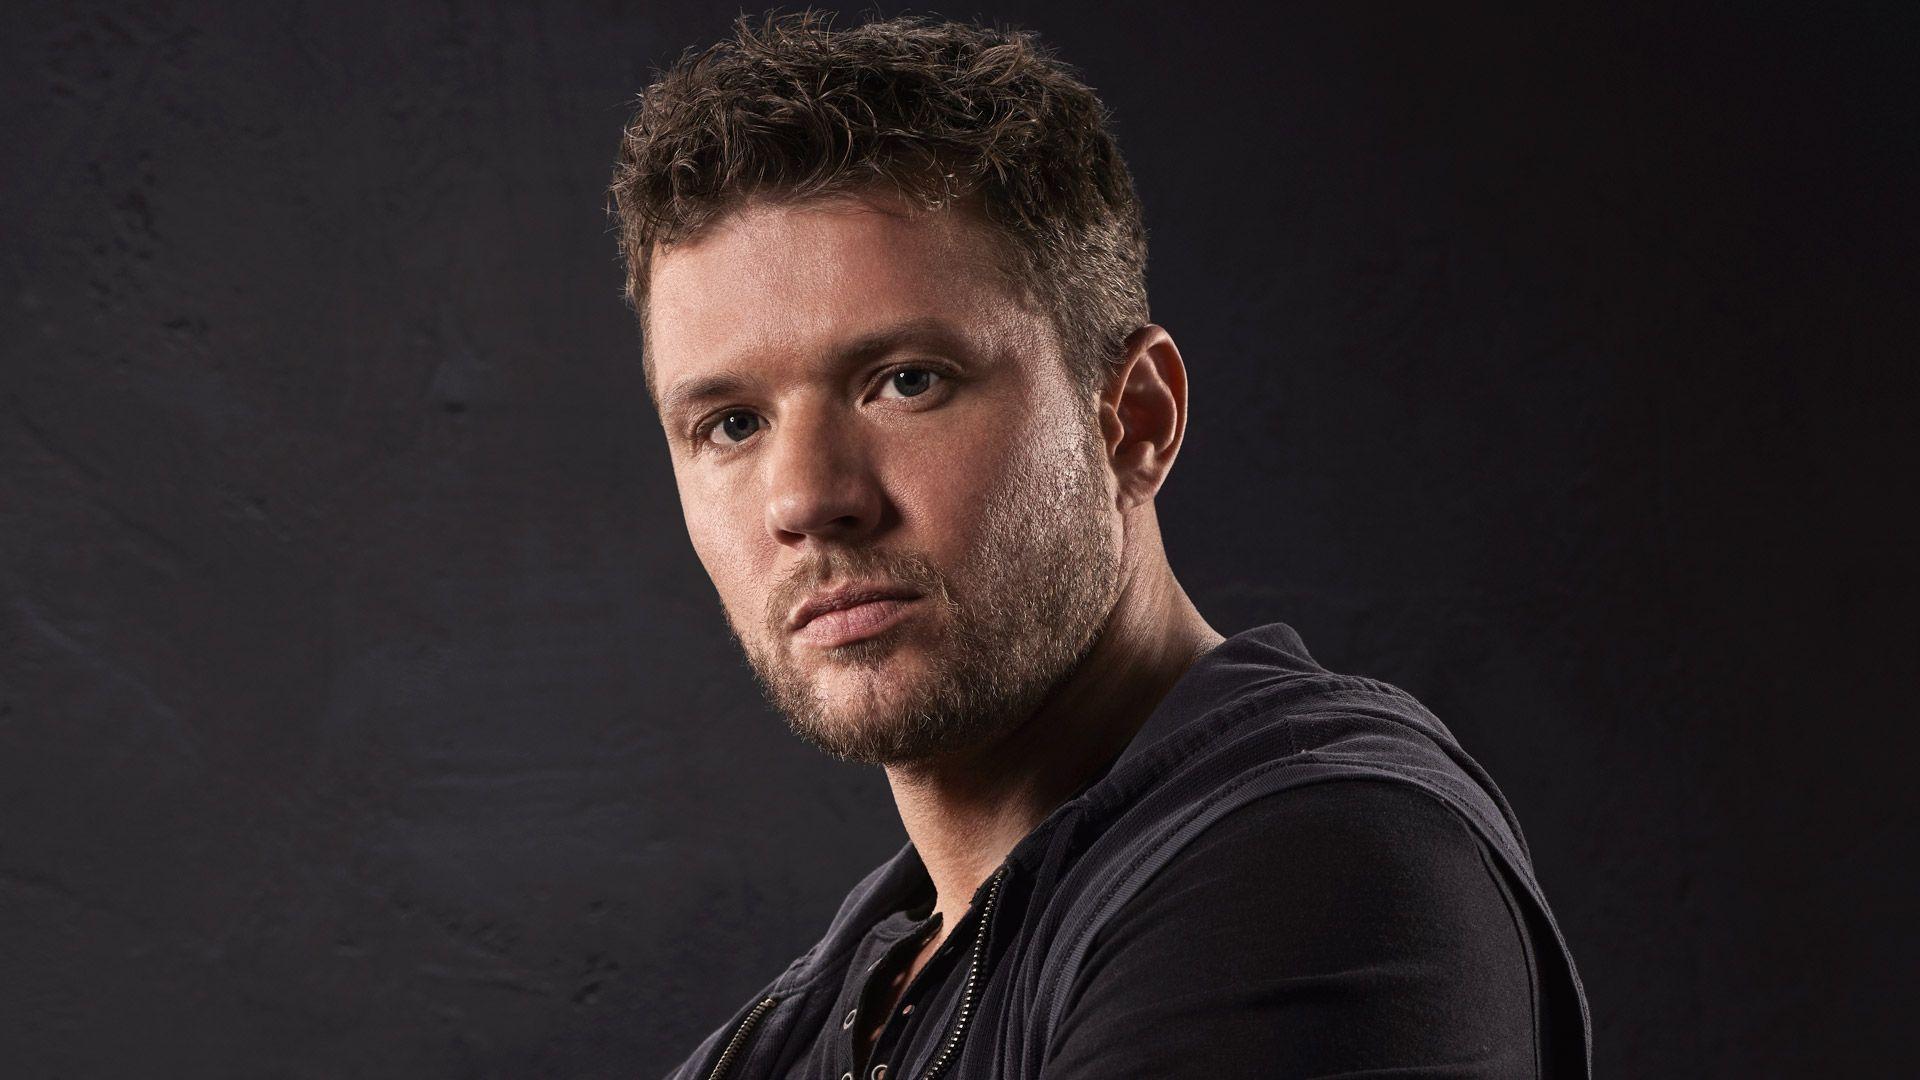 Ryan Phillippe Returns To Horror With 'Wish Upon'